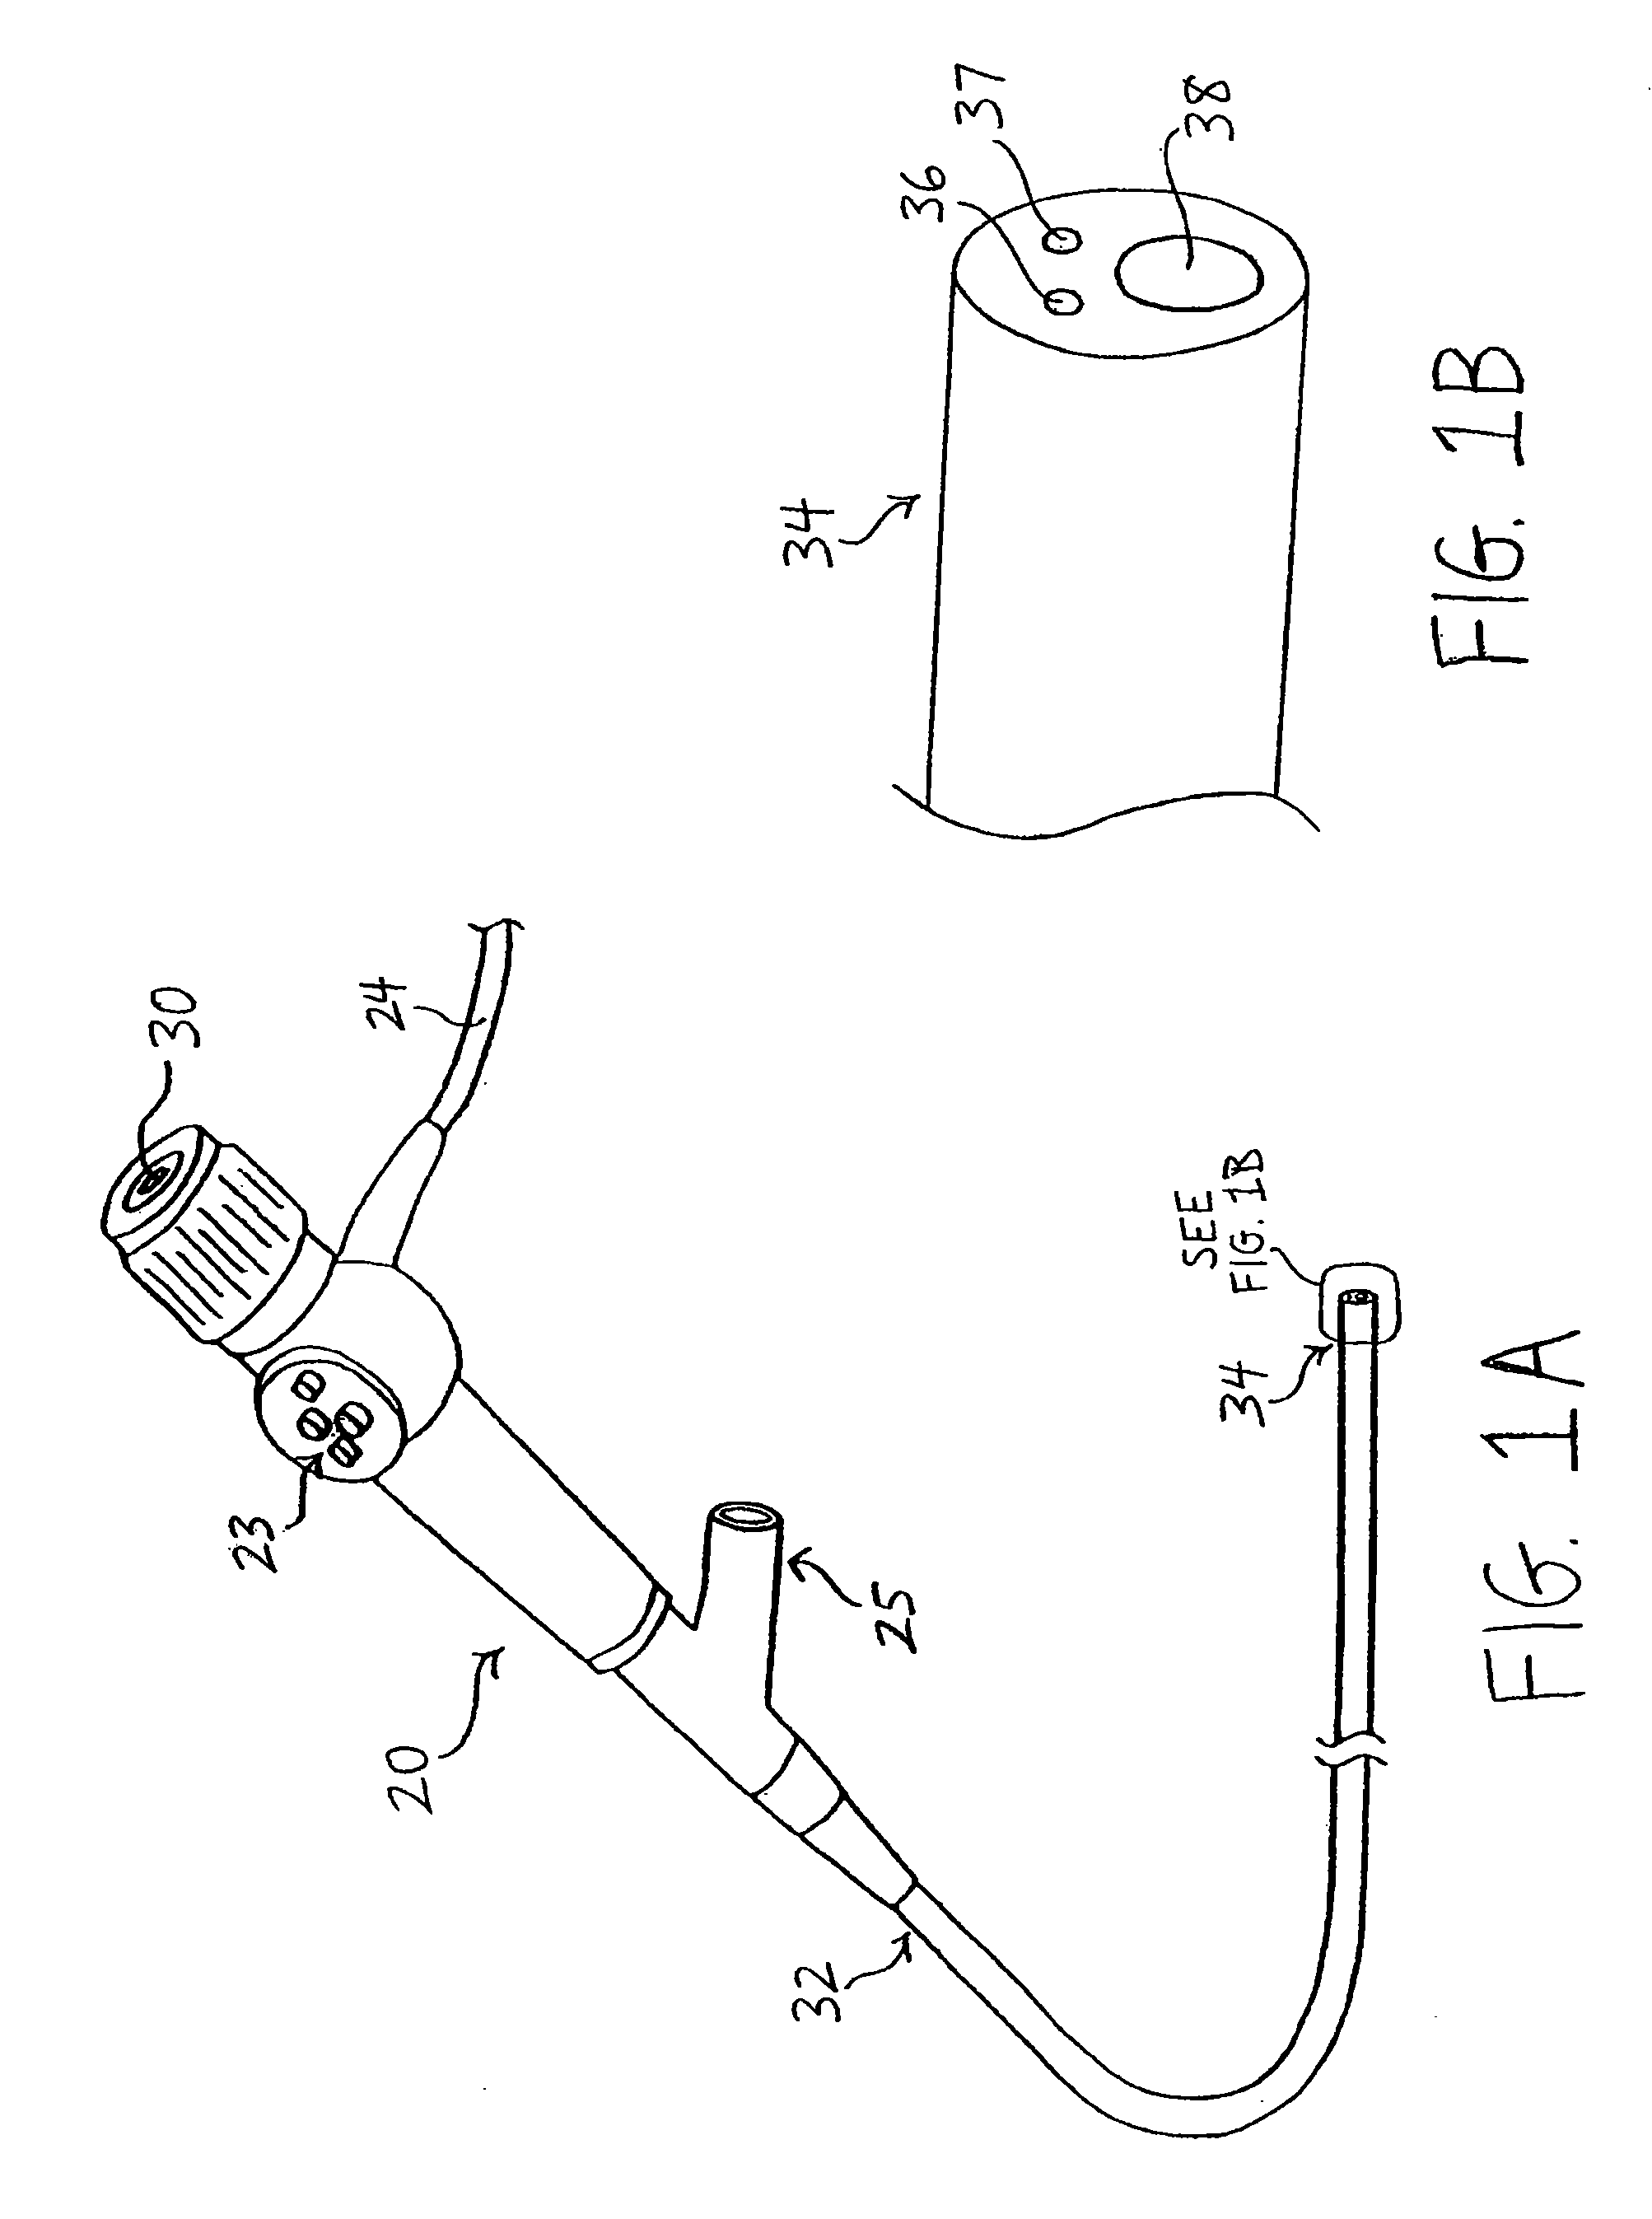 Endoscopic system for resection of tissue